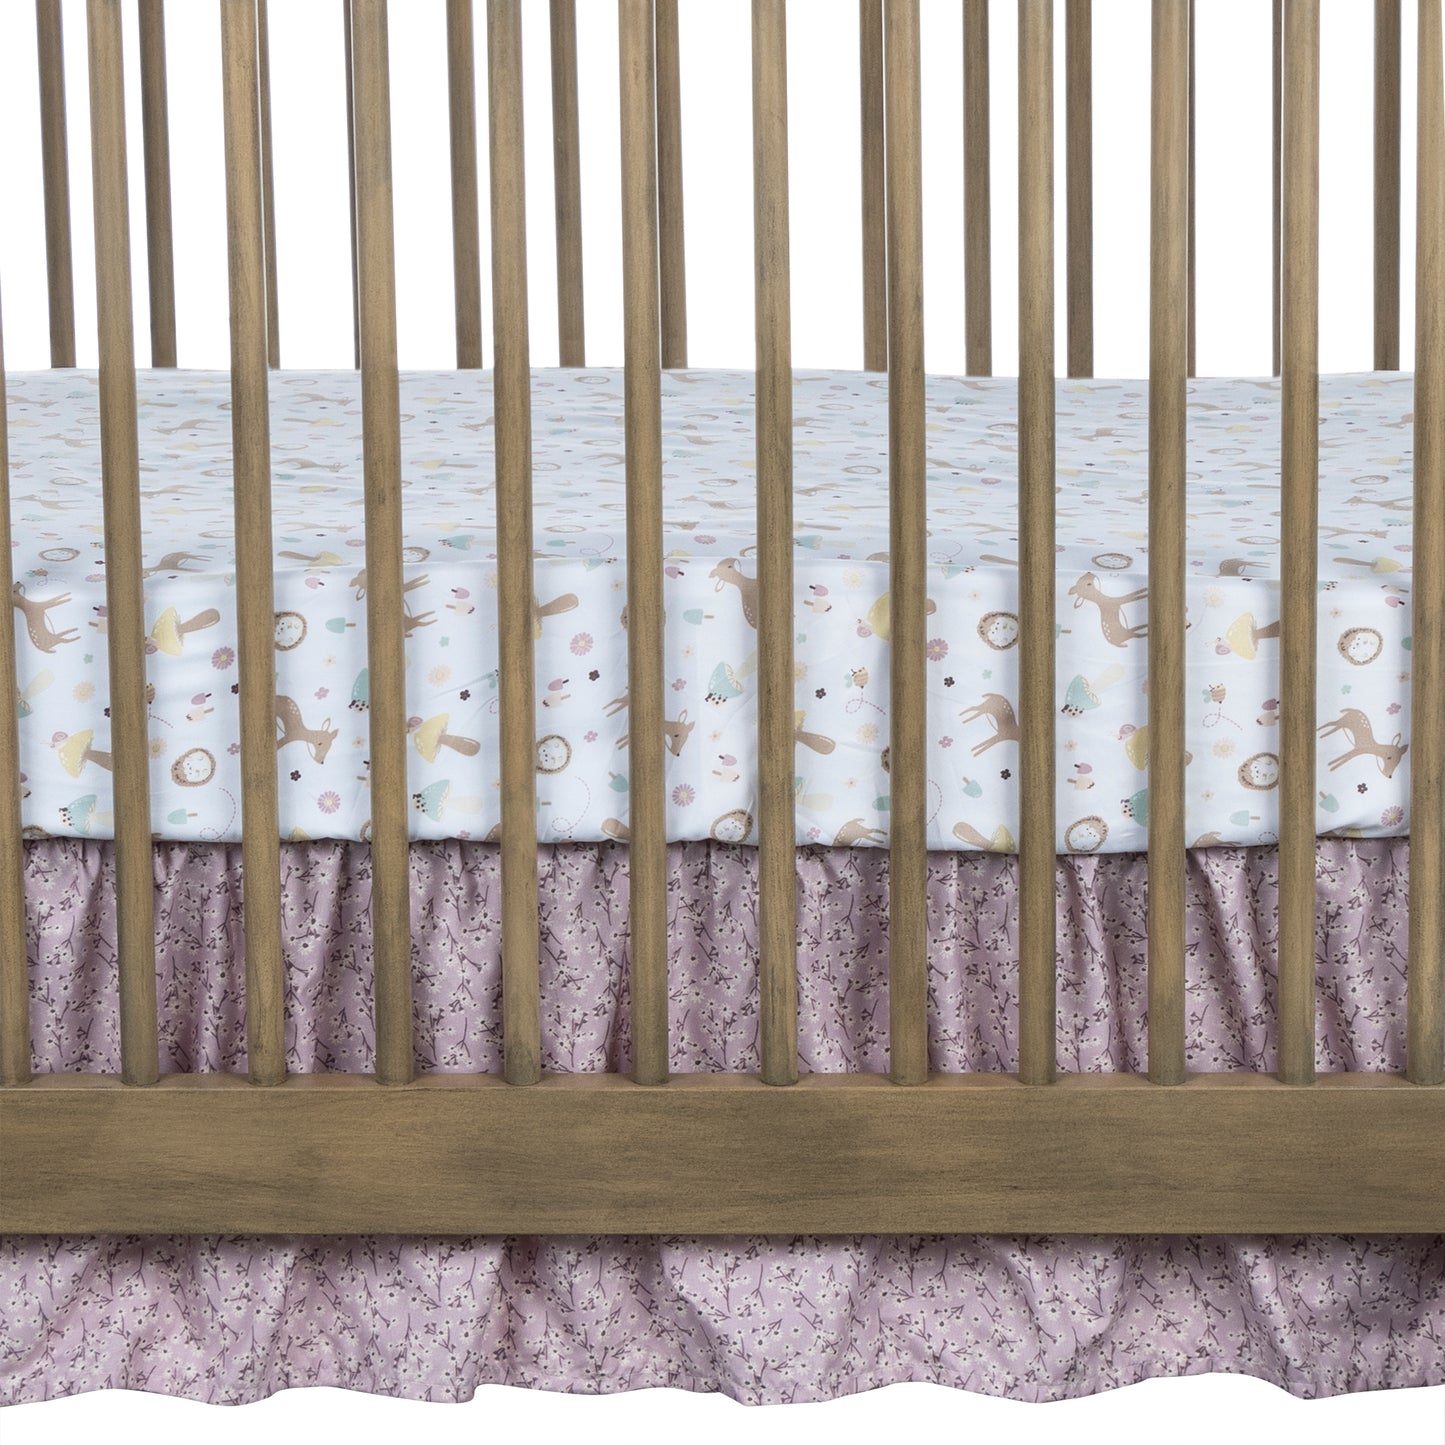 Enchanted Garden 4 Piece Crib Bedding Set by Sammy & Lou®; crib skirt features a lilac floral scatter print.